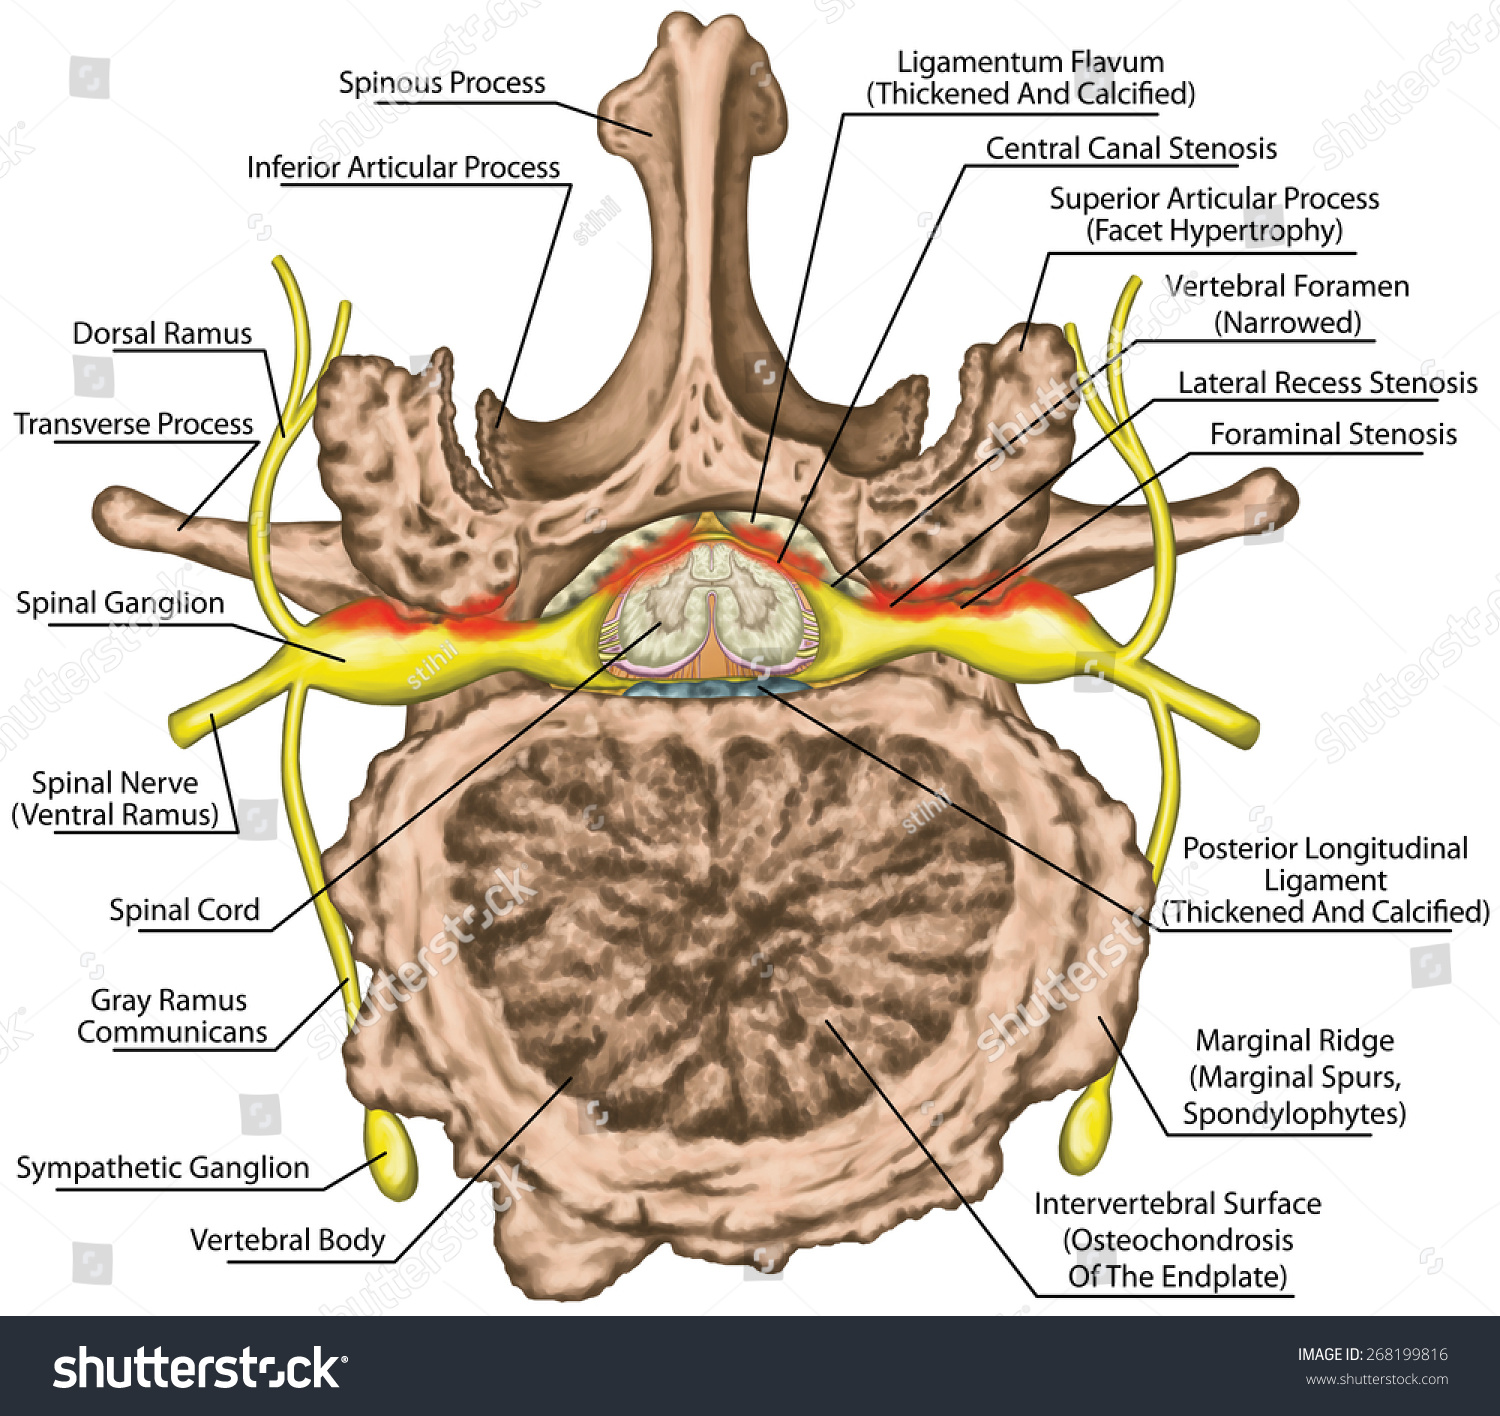 Stenosis, Central Lateral Stenosis, Nervous System, Spinal Cord, Lumbar ...